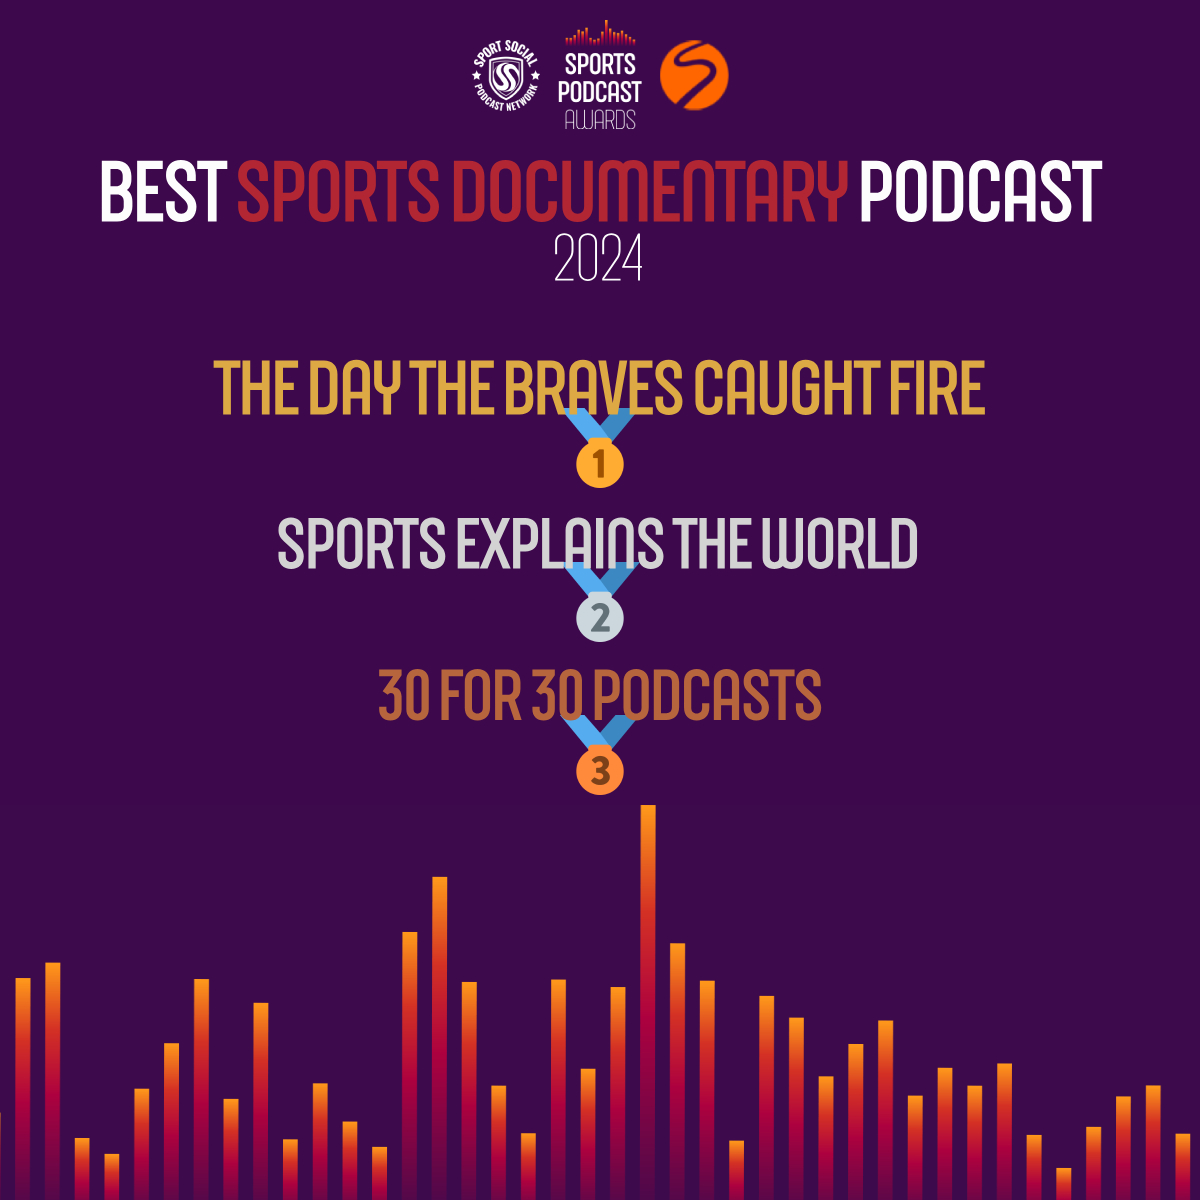 🏆🎥 All your winners of the Best Sports Documentary Podcast awards together are… 🥇 Behind the Braves Presents: The Day The Braves Caught Fire @braves 🥈 Sports Explains the World @WonderyMedia 🥉 30 for 30 Podcasts @30for30 👏